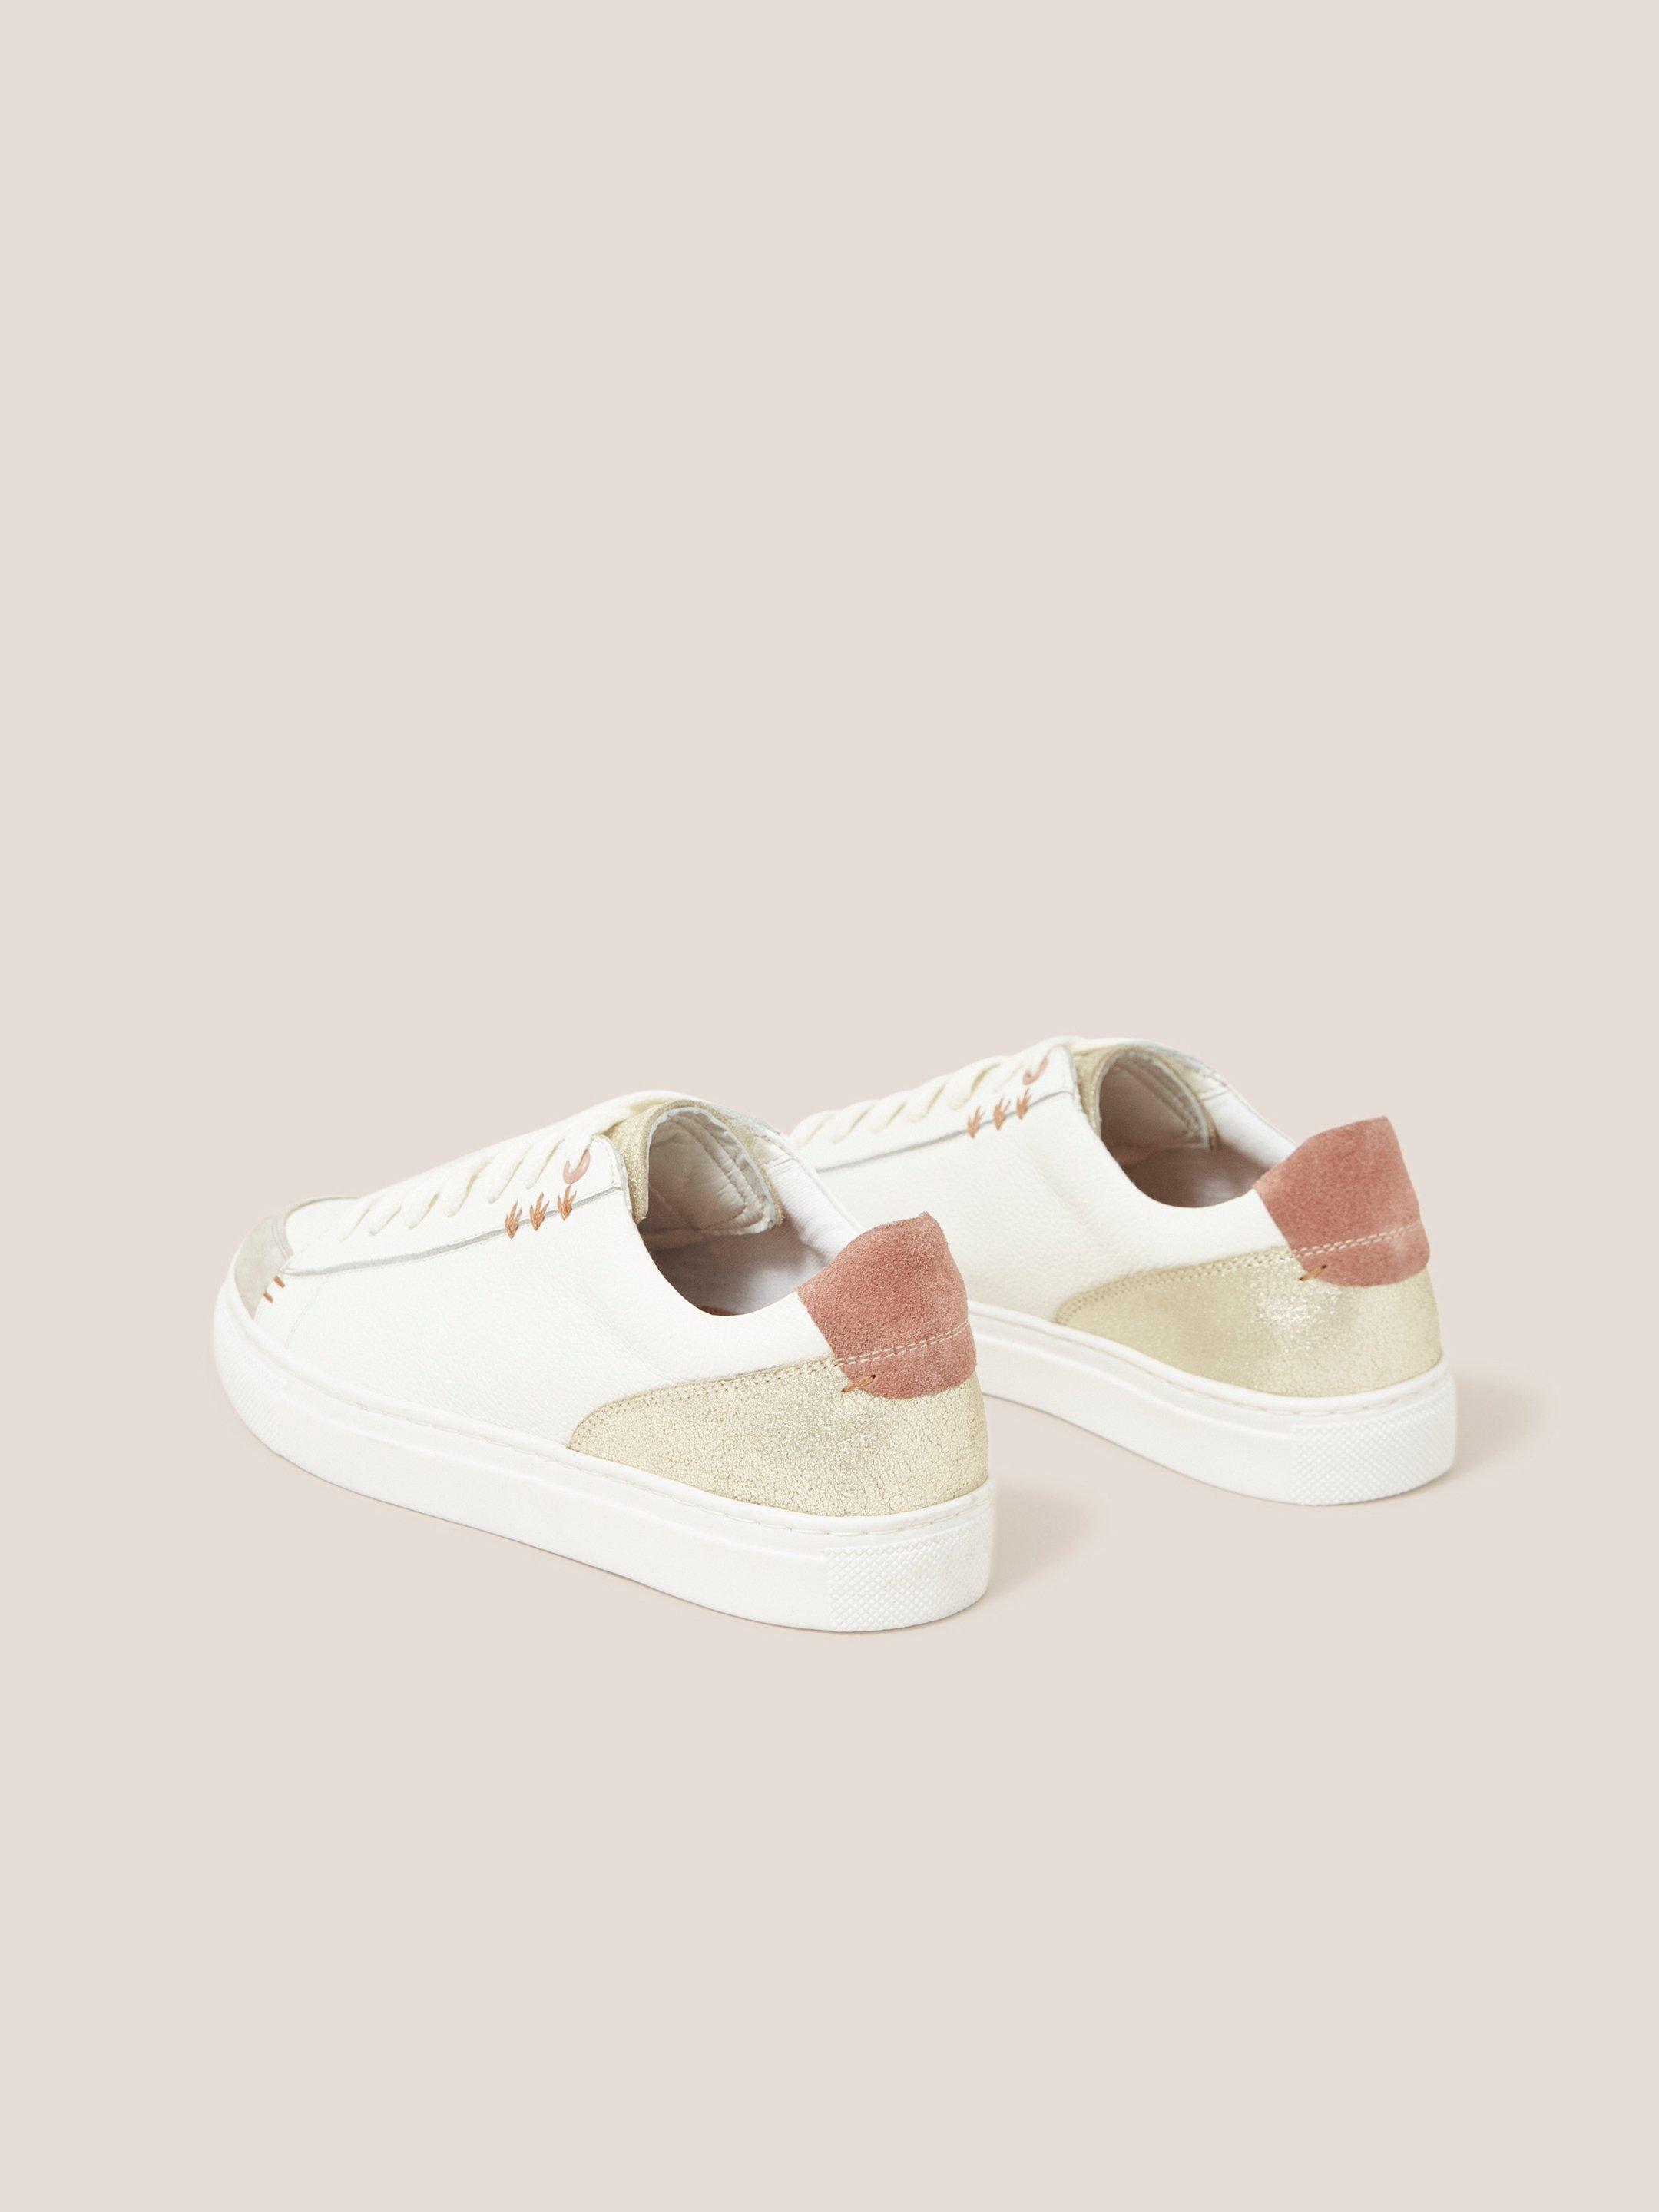 Toni Trainer in WHITE MLT - FLAT BACK